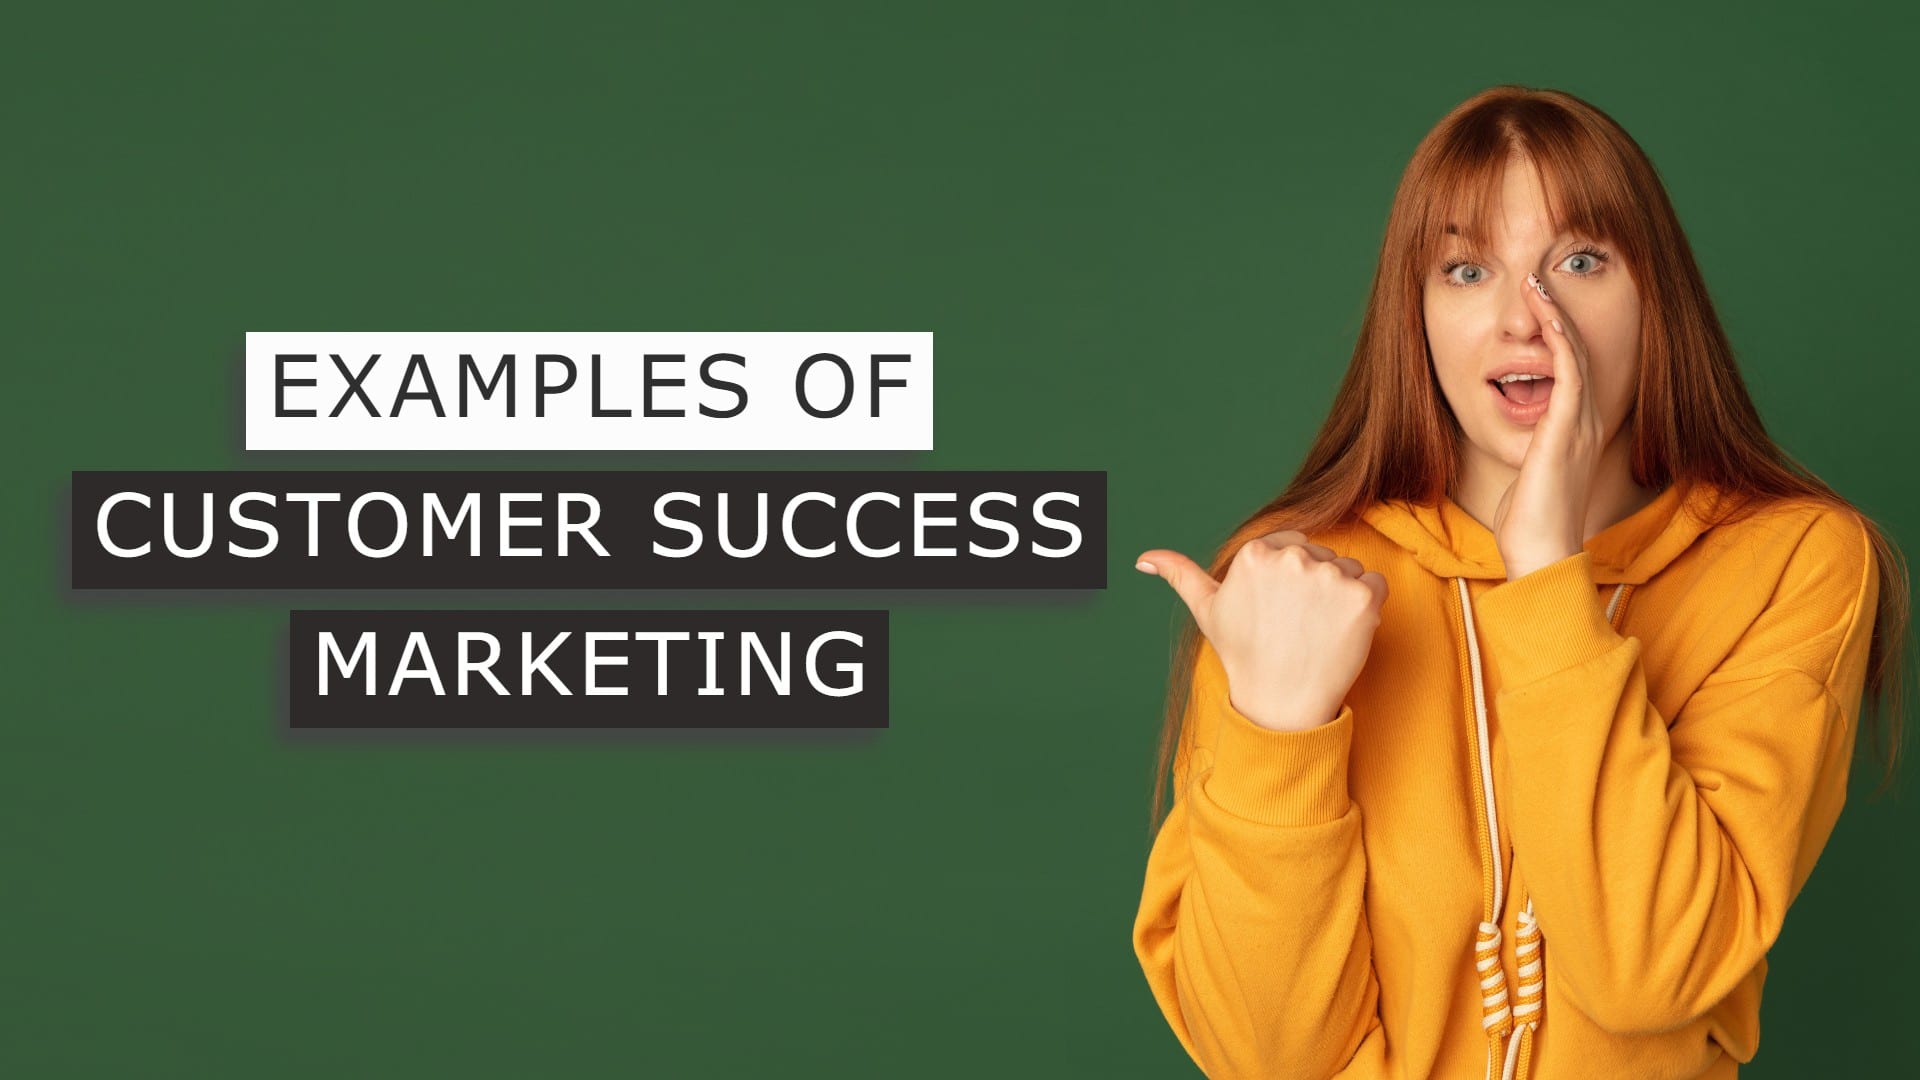 Examples of Customer Success Marketing for SaaS Teams